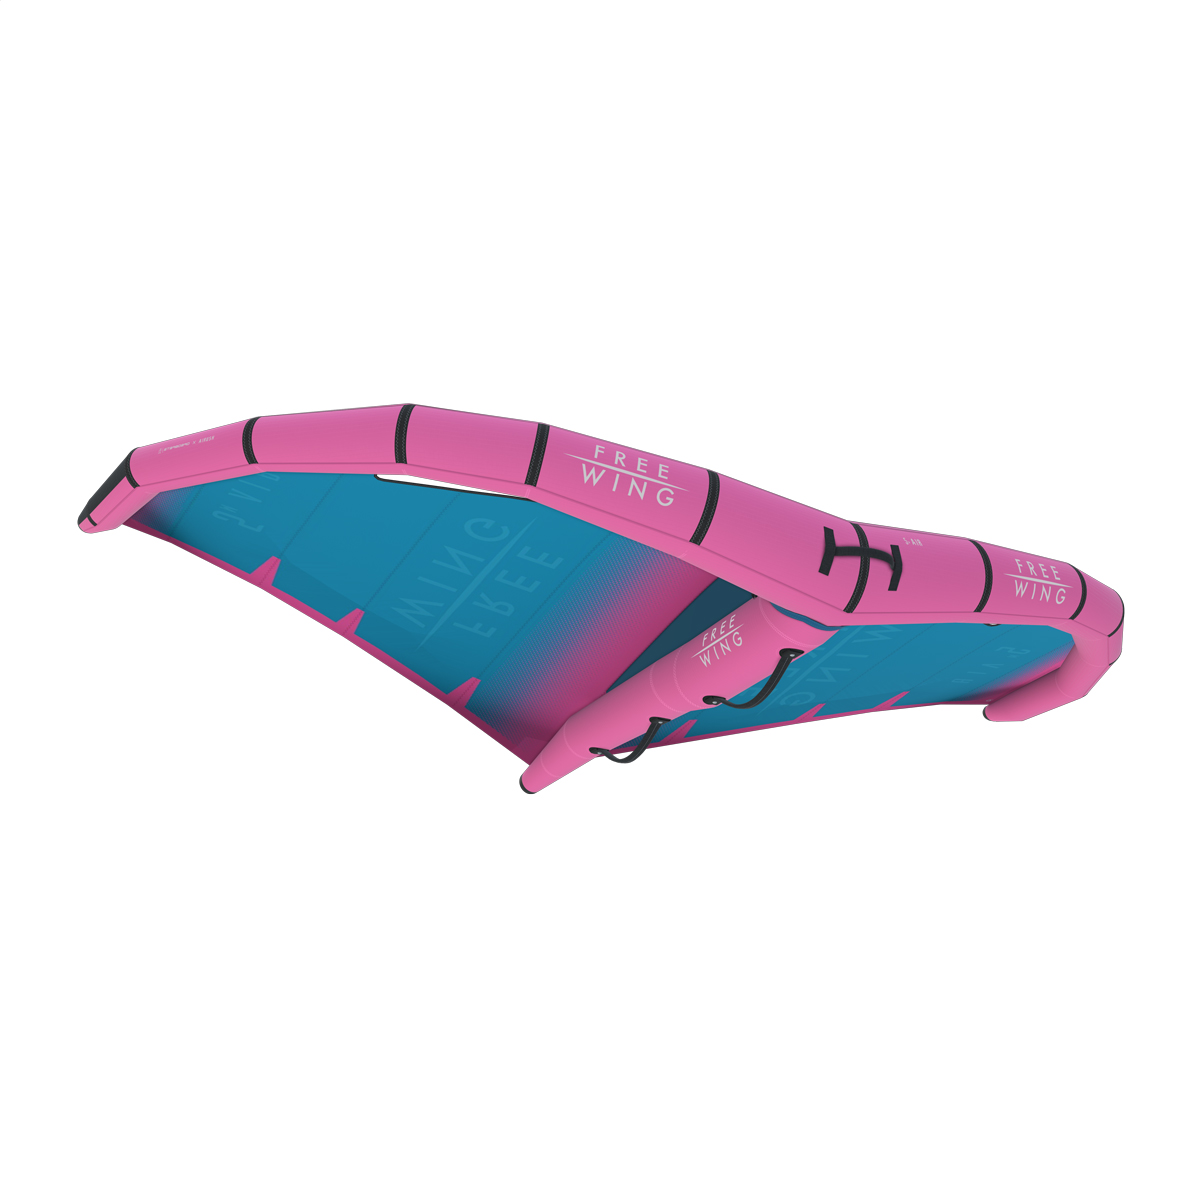 FreeWing_AIR_v3_Blue_and_Pink_45